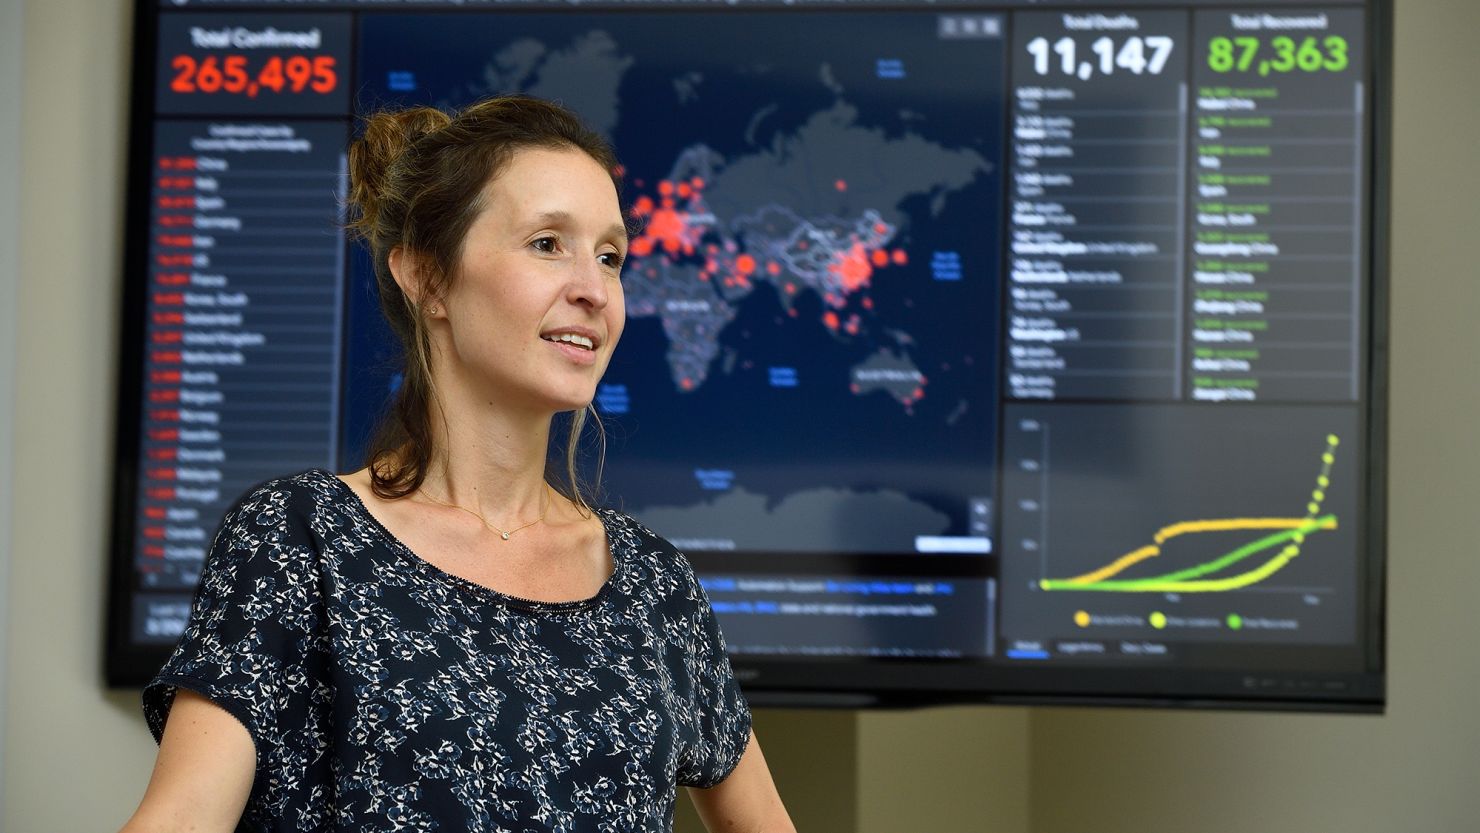 Civil engineering professor Lauren Gardner, of the Center for Systems Science and Engineering at Johns Hopkins University, is the lead behind the dashboard project.